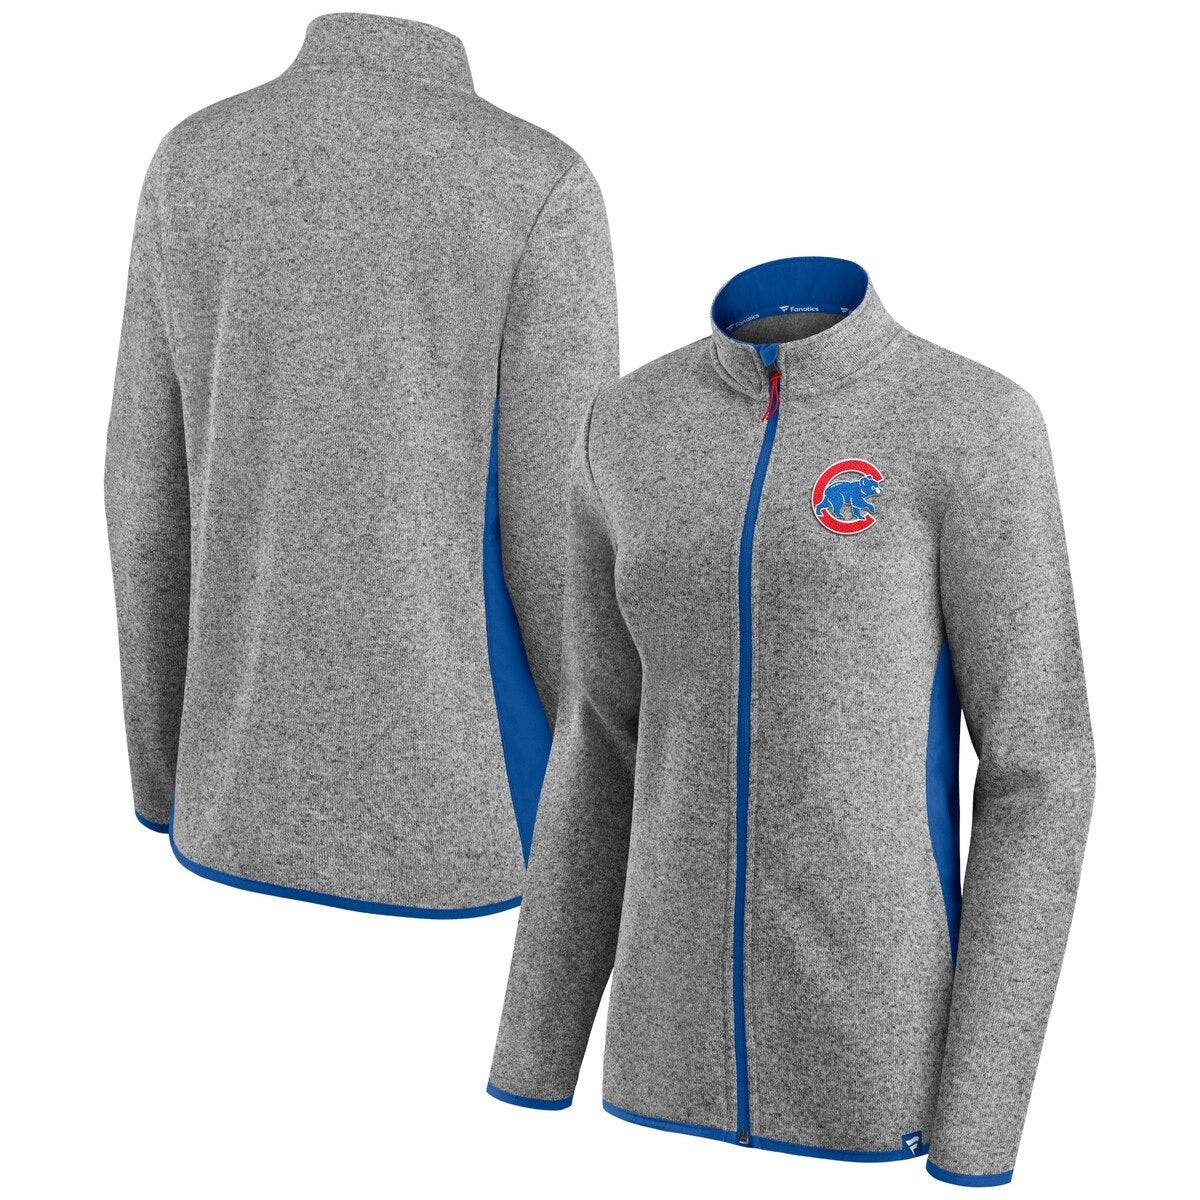 Nordstrom Women Clothing Jackets Fleece Jackets Womens Branded Heathered Charcoal Chicago Cubs Primary Logo Fleece Full-Zip Jacket in Heather Charcoal at Nordstrom 